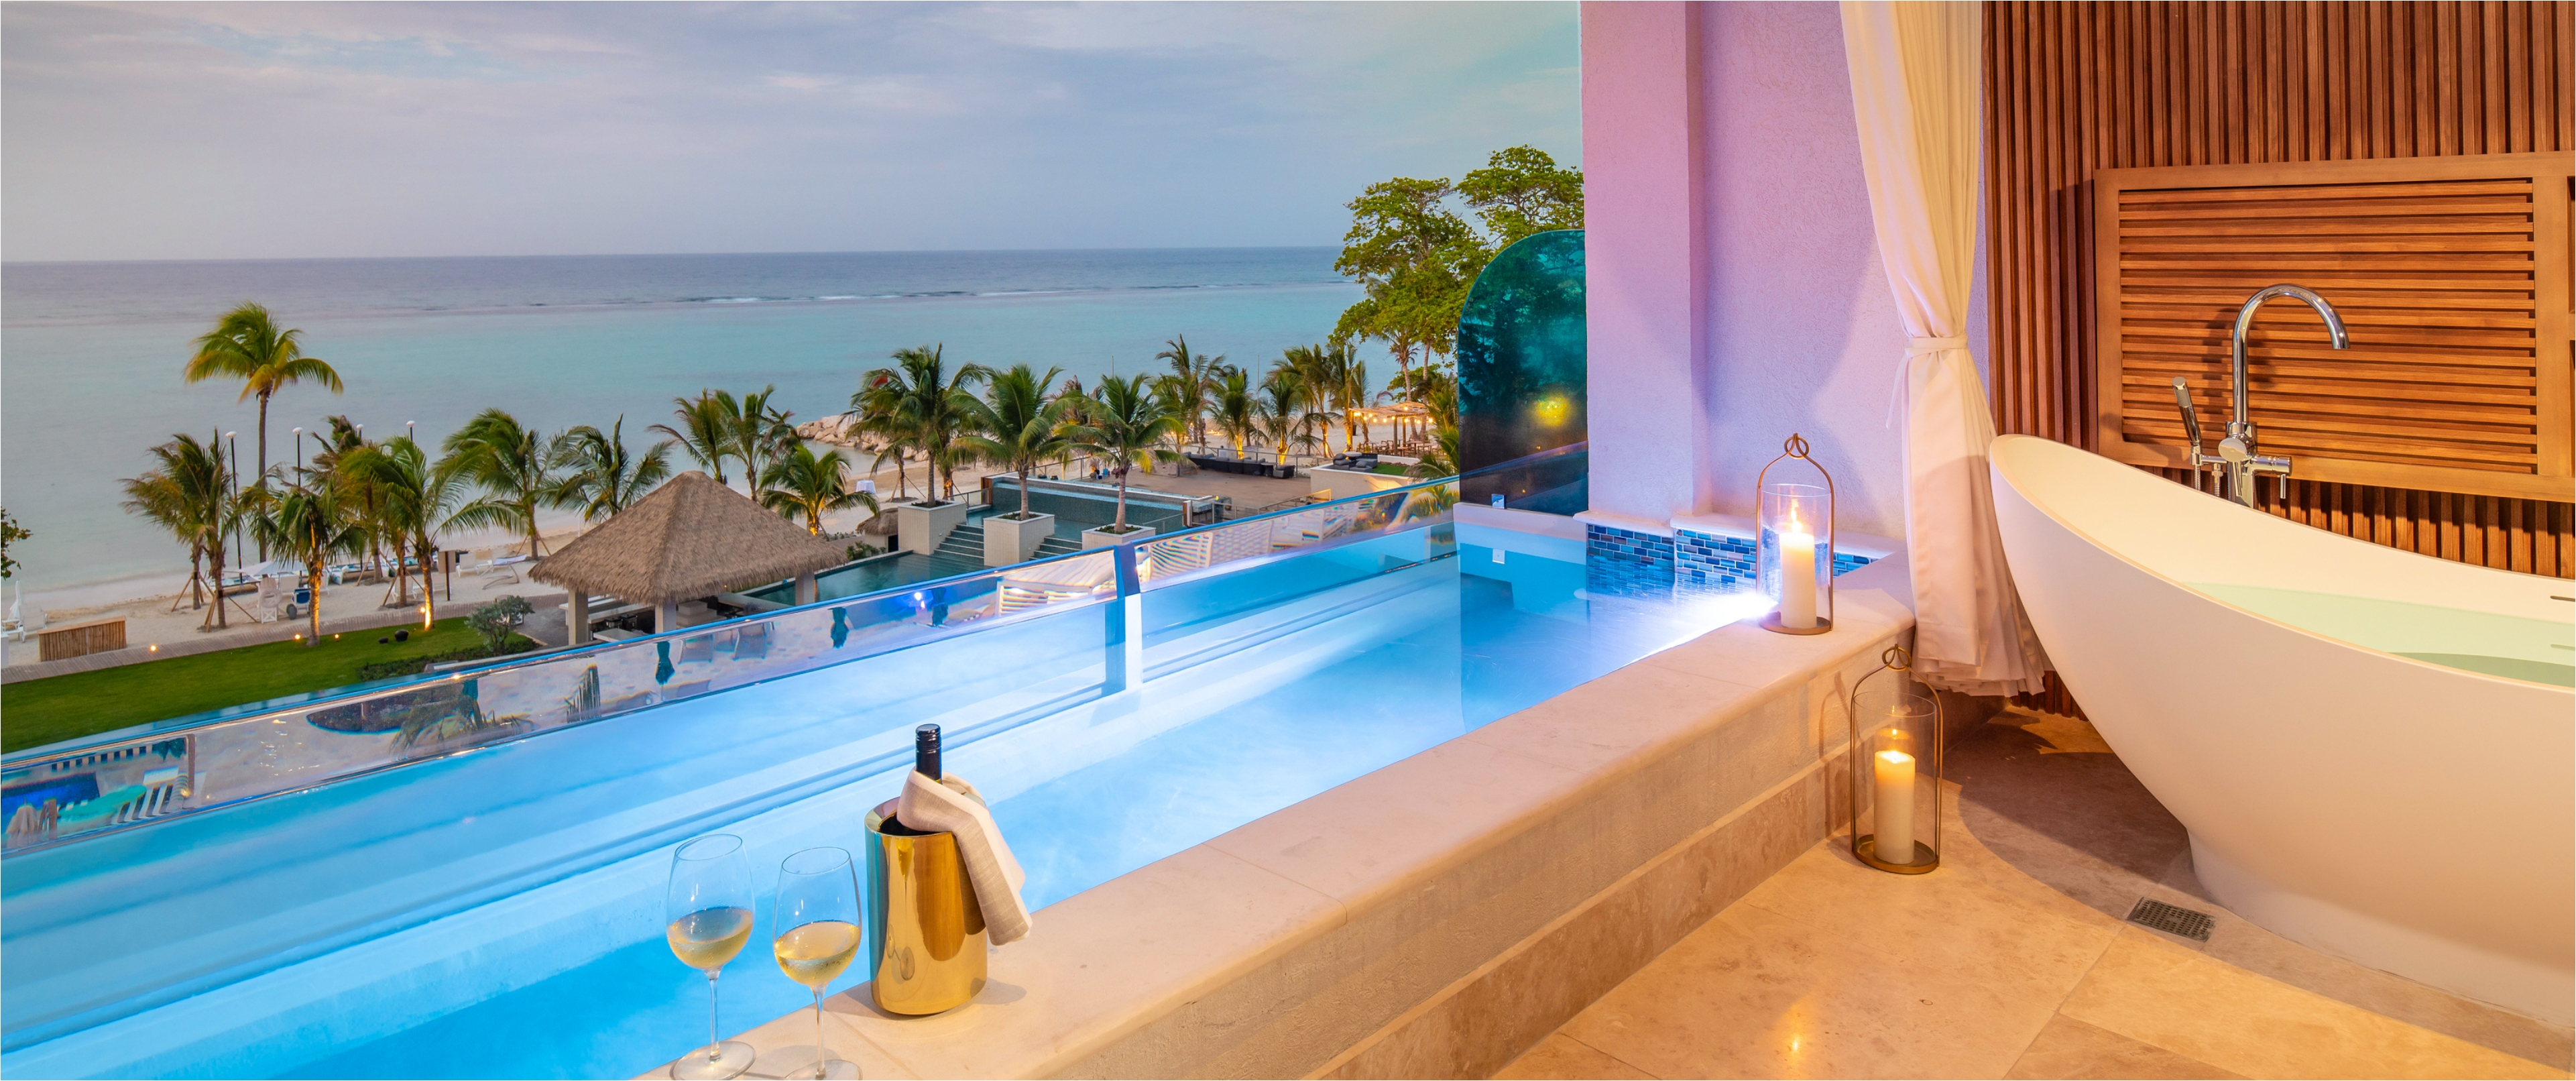 SANDALS® All-Inclusive Honeymoon Packages & Resorts